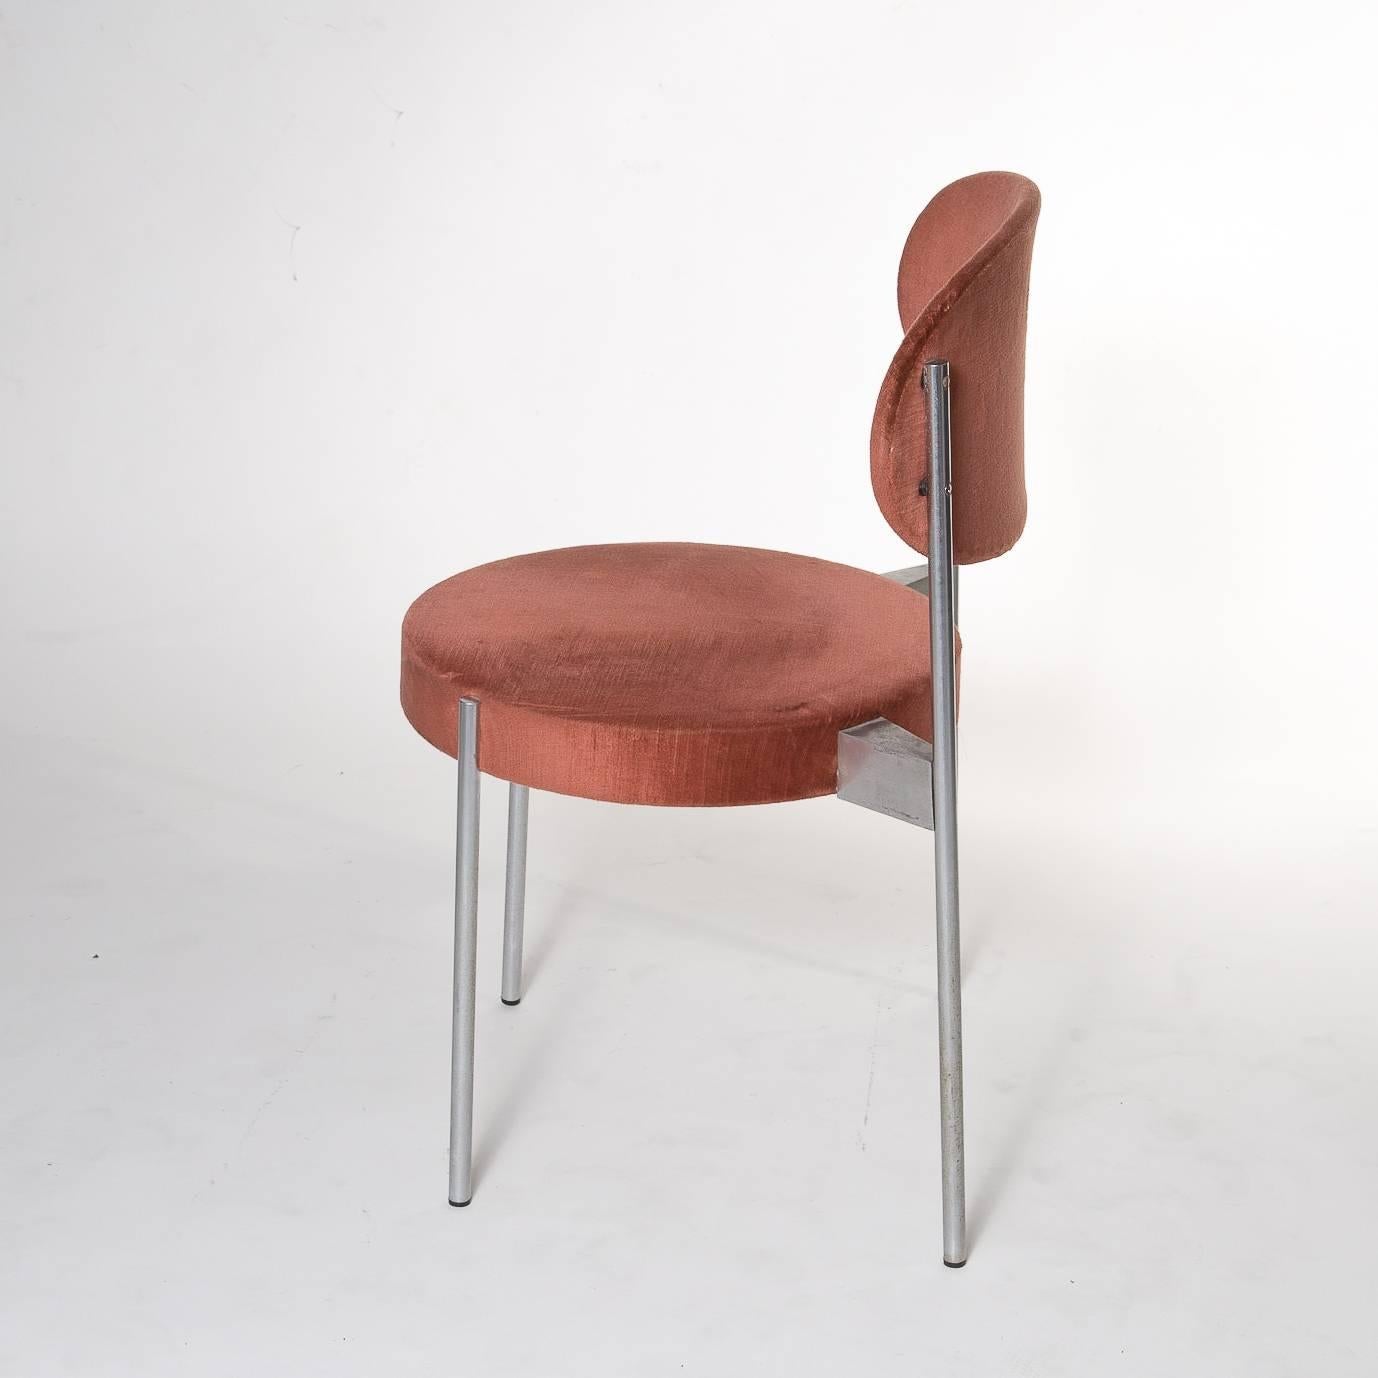 Stackable dining chairs upholstered in velvet.
Stainless steel frame.
Design by Verner Panton for Thonet in 1967.
Original condition.
Fabric wears according to age.